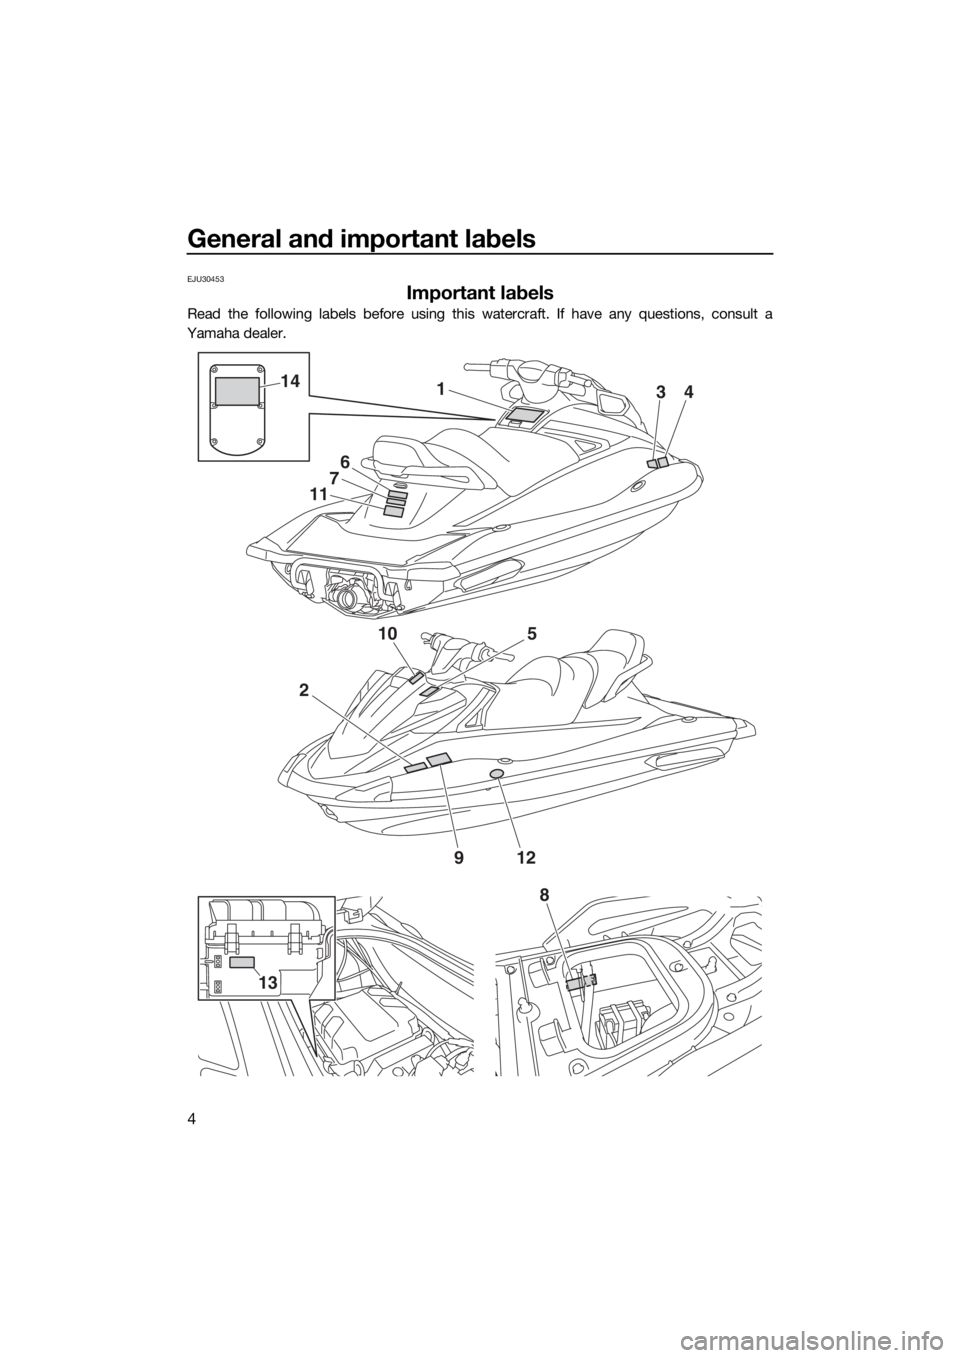 YAMAHA VX 2017  Owners Manual General and important labels
4
EJU30453
Important labels
Read the following labels before using this watercraft. If have any questions, consult a
Yamaha dealer.
2
10
1
6
7
11
34
5
912
14
8
13
UF4G71E0